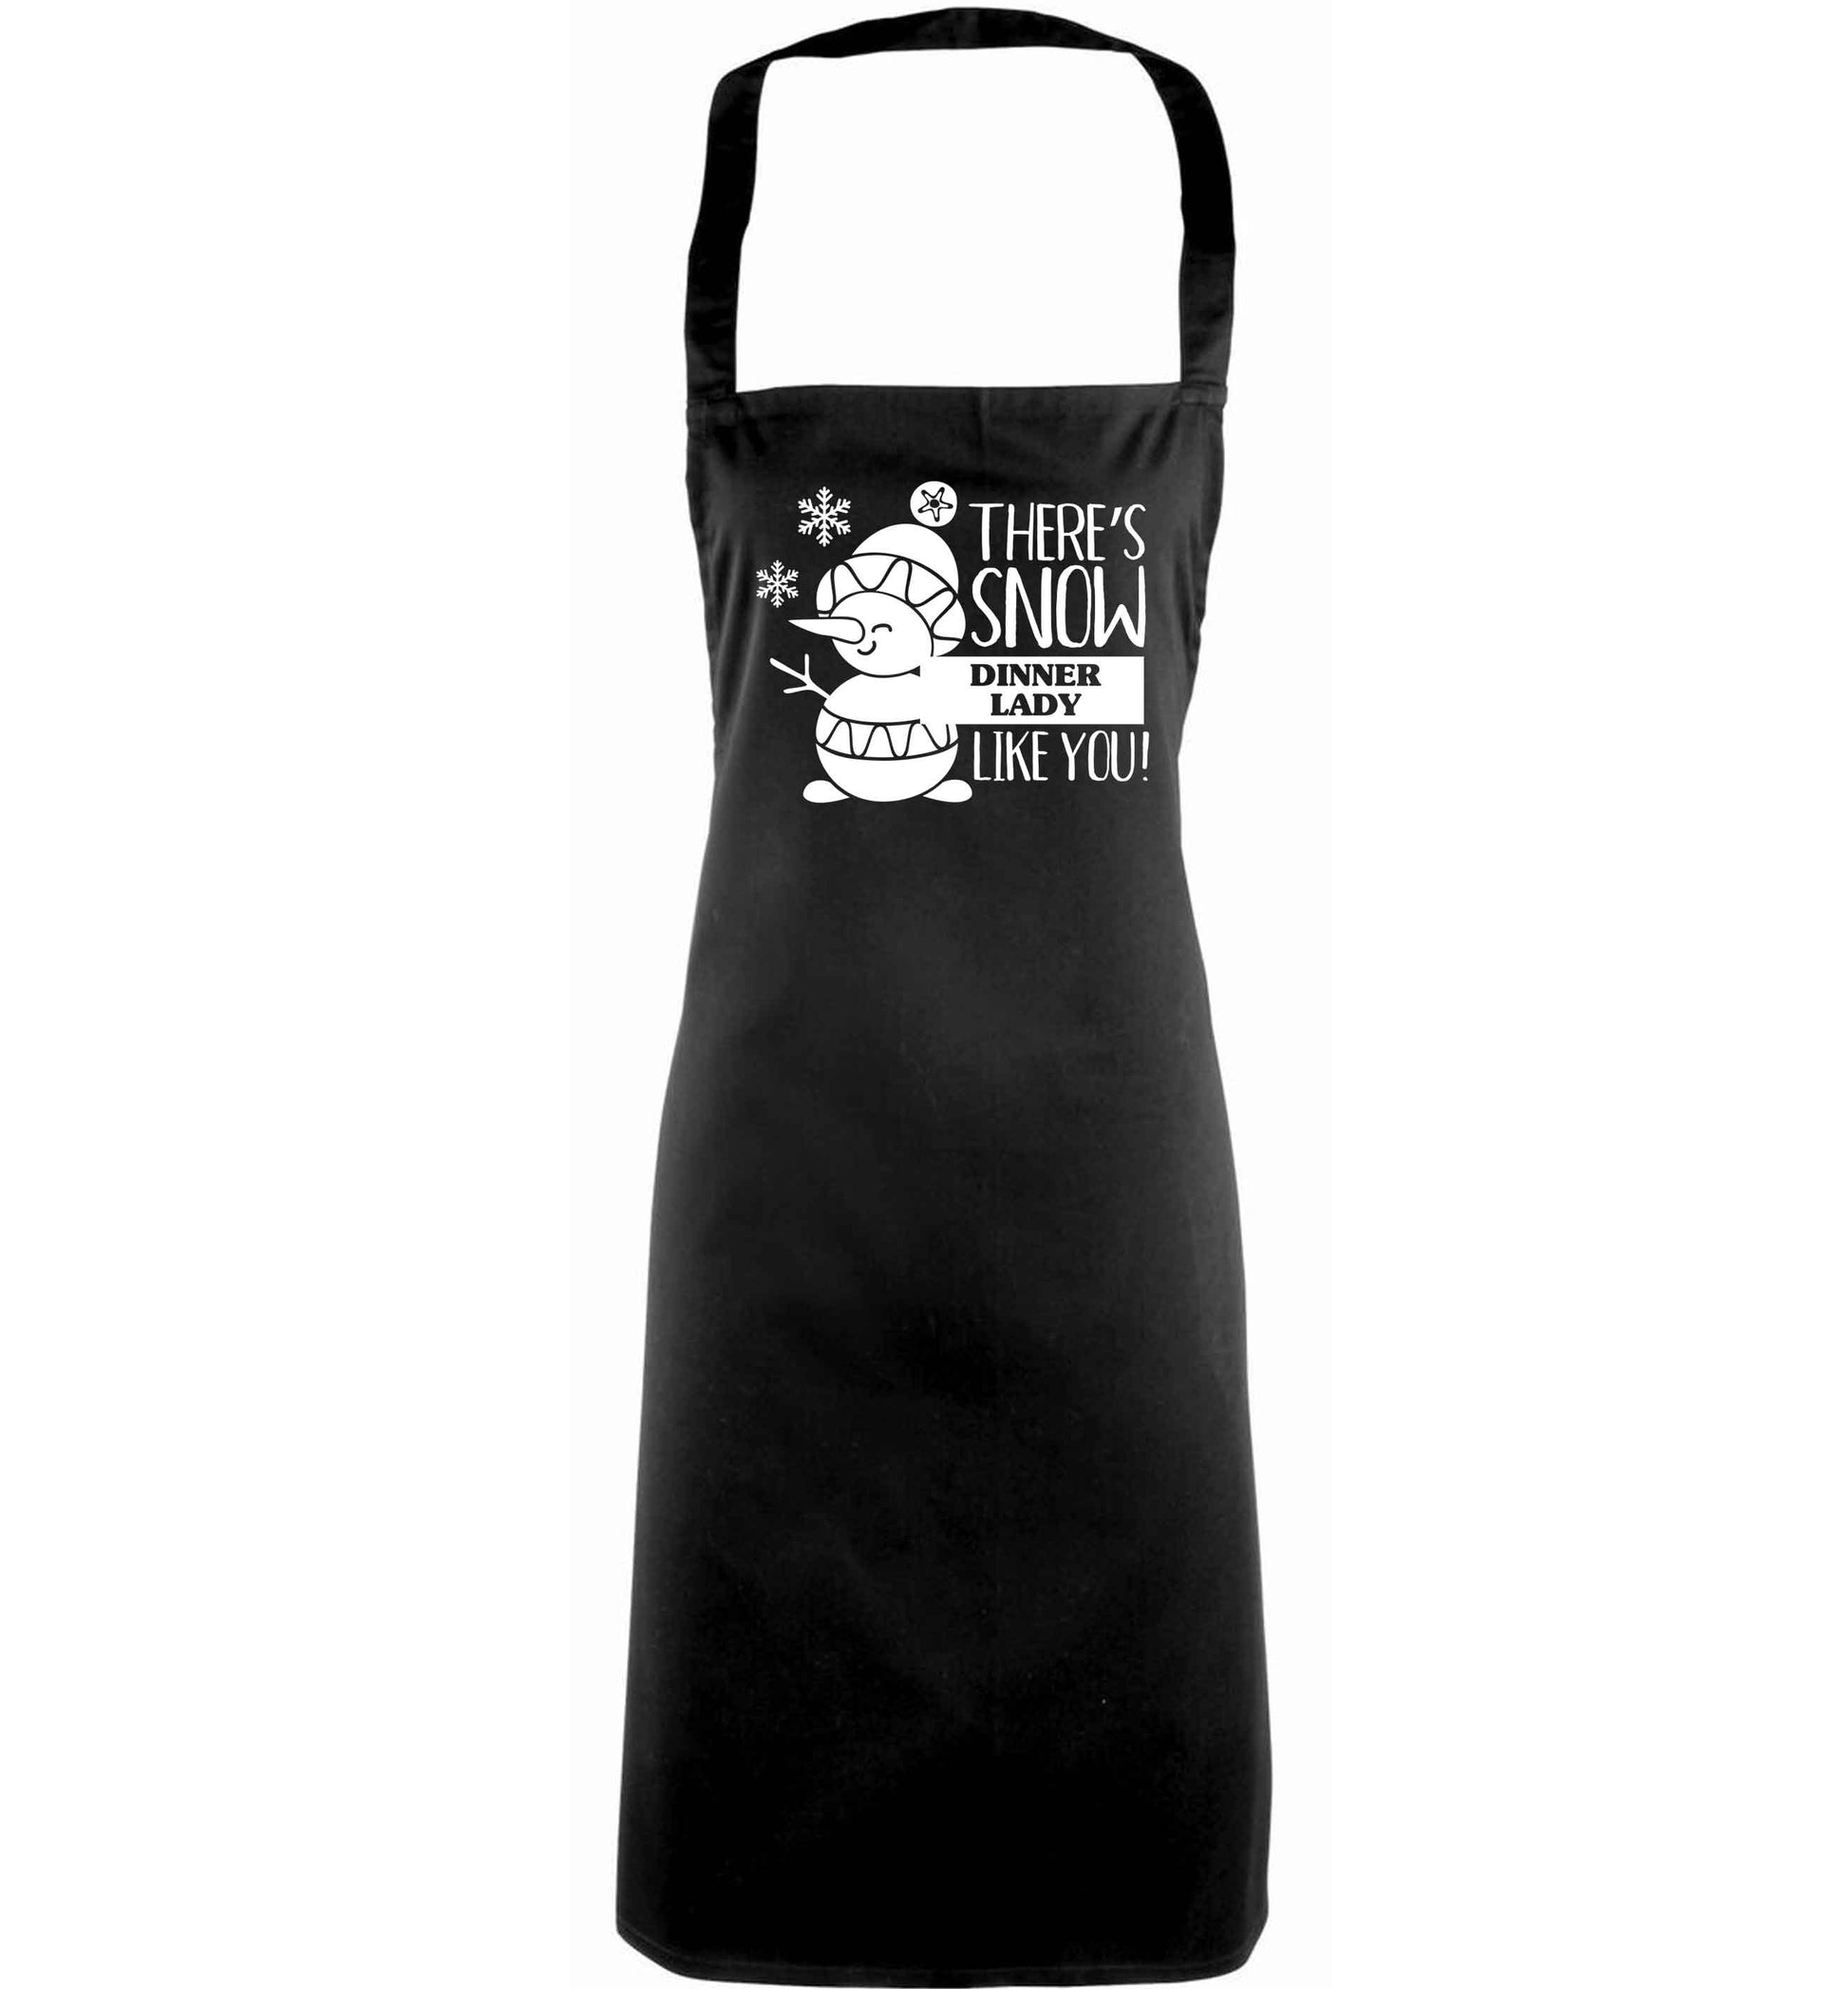 There's snow dinner lady like you adults black apron